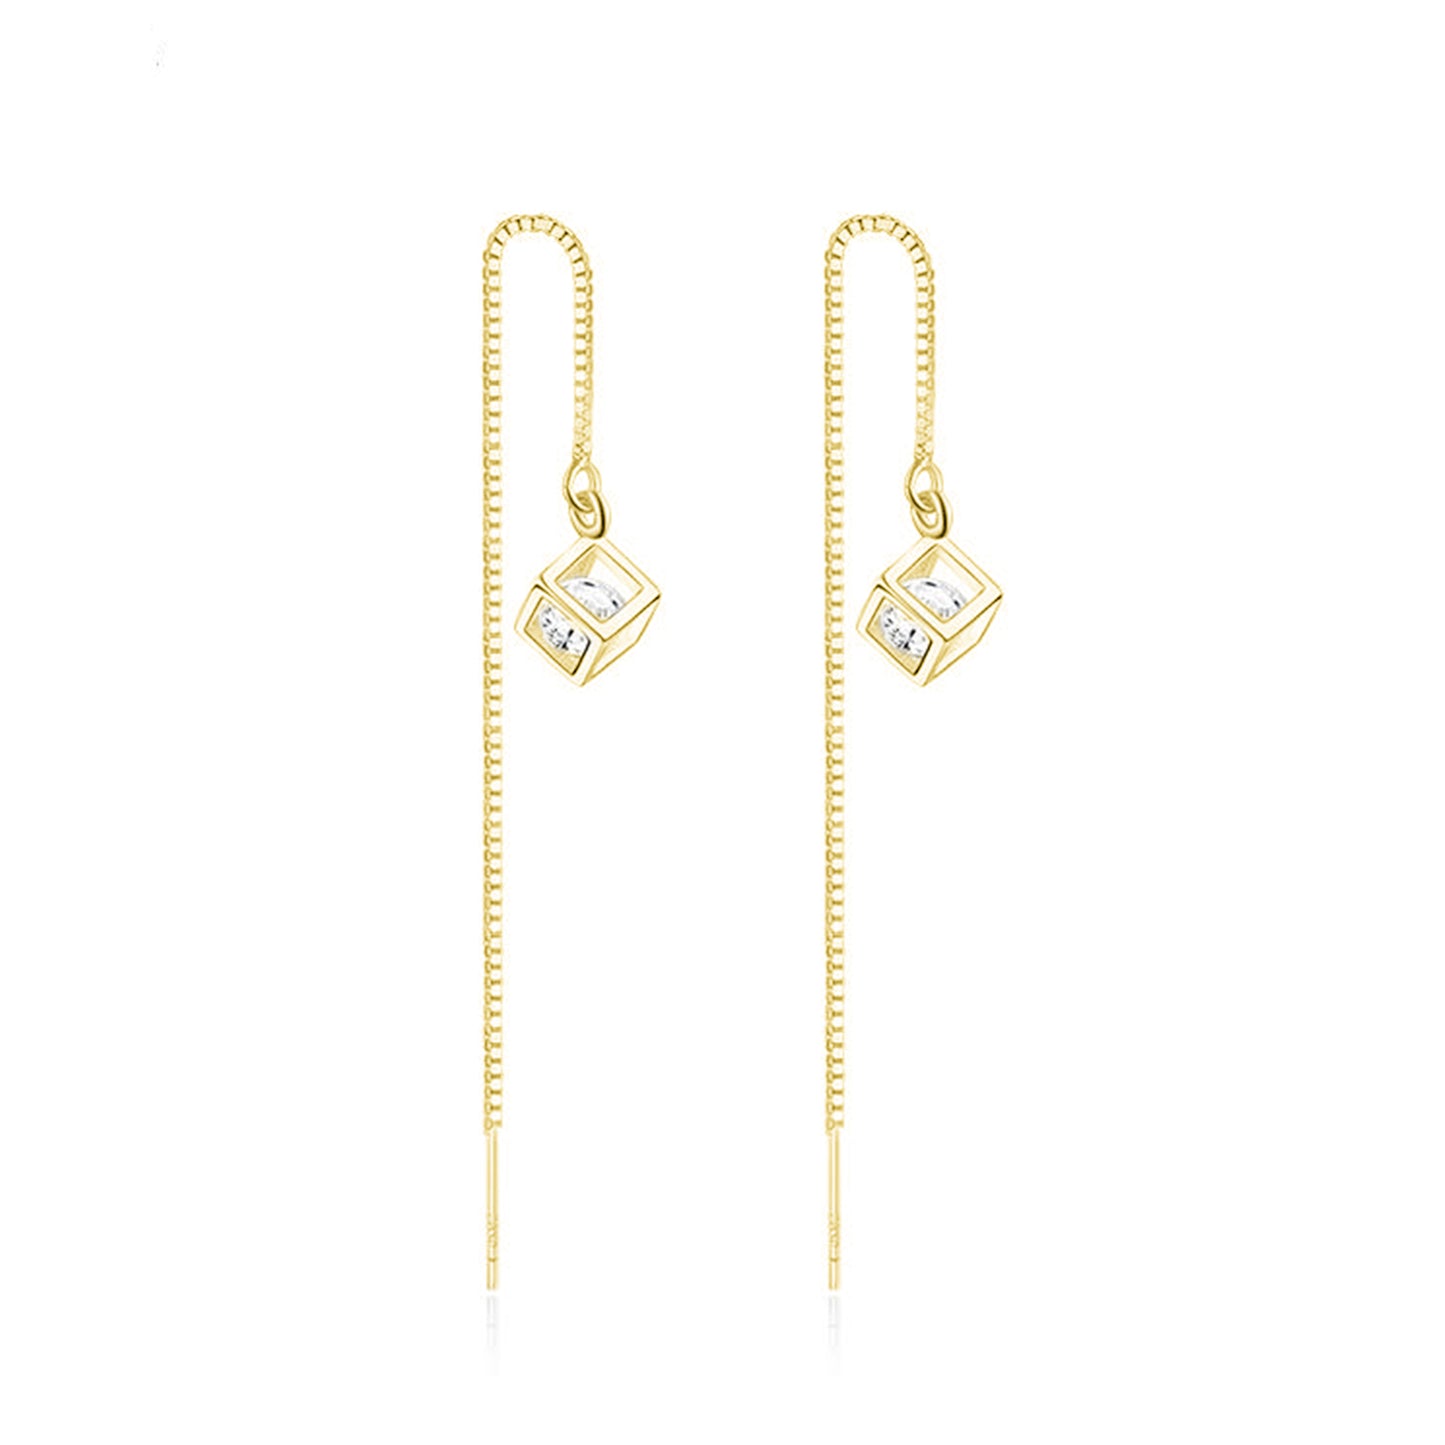 Cube CZ Dangle Theader Earrings with Sterling Silver Posts and Backs